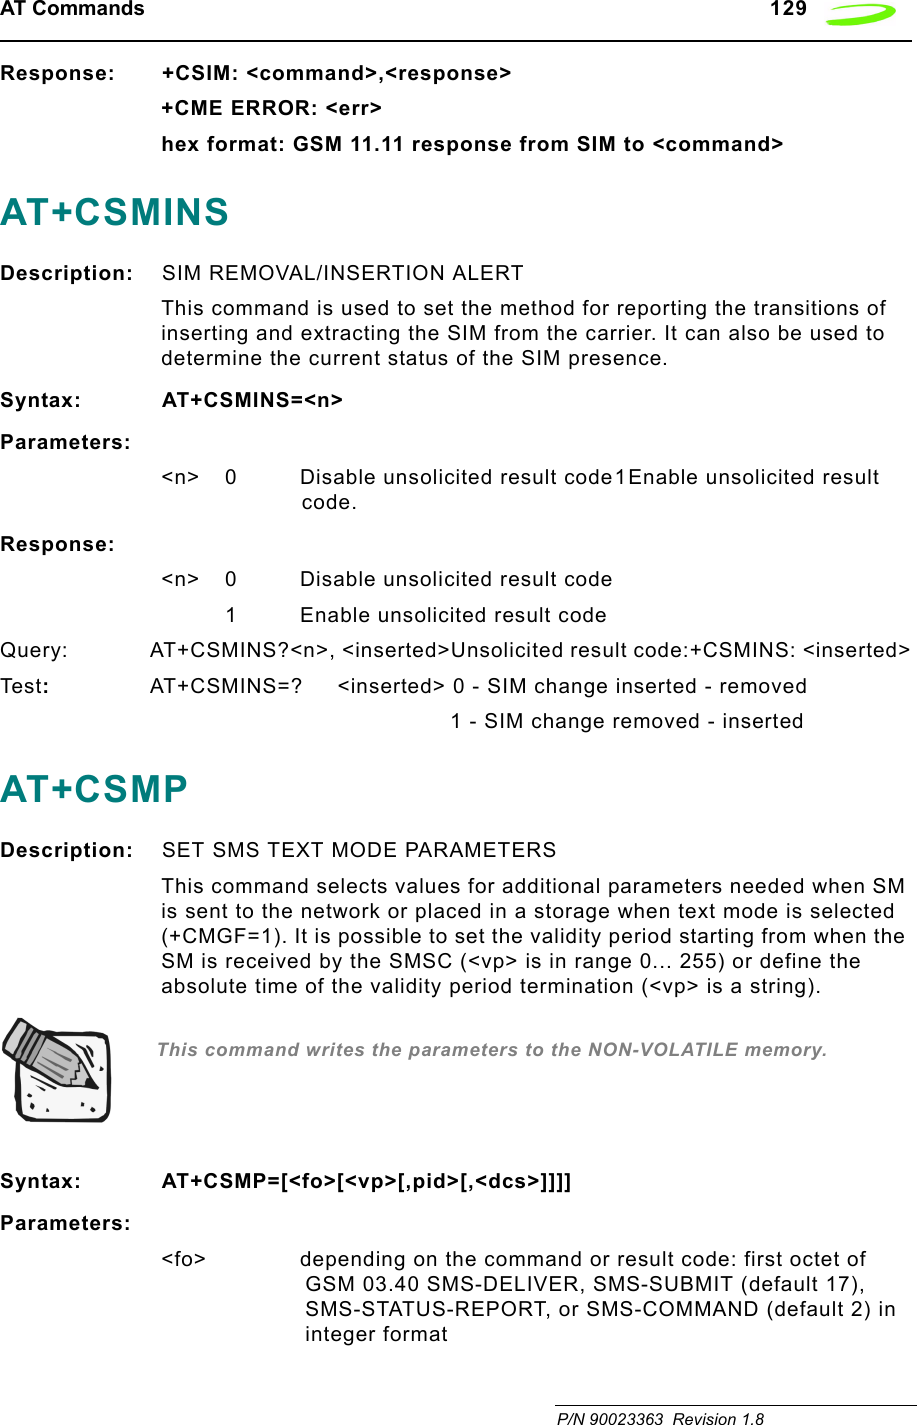 AT Commands   129 P/N 90023363  Revision 1.8 Response: +CSIM: &lt;command&gt;,&lt;response&gt;+CME ERROR: &lt;err&gt;hex format: GSM 11.11 response from SIM to &lt;command&gt;AT+CSMINSDescription: SIM REMOVAL/INSERTION ALERTThis command is used to set the method for reporting the transitions of inserting and extracting the SIM from the carrier. It can also be used to determine the current status of the SIM presence.Syntax: AT+CSMINS=&lt;n&gt;Parameters:&lt;n&gt; 0 Disable unsolicited result code1Enable unsolicited result code.Response:&lt;n&gt; 0 Disable unsolicited result code1 Enable unsolicited result codeQuery: AT+CSMINS?&lt;n&gt;, &lt;inserted&gt;Unsolicited result code:+CSMINS: &lt;inserted&gt;Tes t :  AT+CSMINS=?     &lt;inserted&gt; 0 - SIM change inserted - removed1 - SIM change removed - insertedAT+CSMPDescription: SET SMS TEXT MODE PARAMETERSThis command selects values for additional parameters needed when SM is sent to the network or placed in a storage when text mode is selected (+CMGF=1). It is possible to set the validity period starting from when the SM is received by the SMSC (&lt;vp&gt; is in range 0... 255) or define the absolute time of the validity period termination (&lt;vp&gt; is a string).  This command writes the parameters to the NON-VOLATILE memory.Syntax: AT+CSMP=[&lt;fo&gt;[&lt;vp&gt;[,pid&gt;[,&lt;dcs&gt;]]]]Parameters:&lt;fo&gt; depending on the command or result code: first octet of GSM 03.40 SMS-DELIVER, SMS-SUBMIT (default 17), SMS-STATUS-REPORT, or SMS-COMMAND (default 2) in integer format